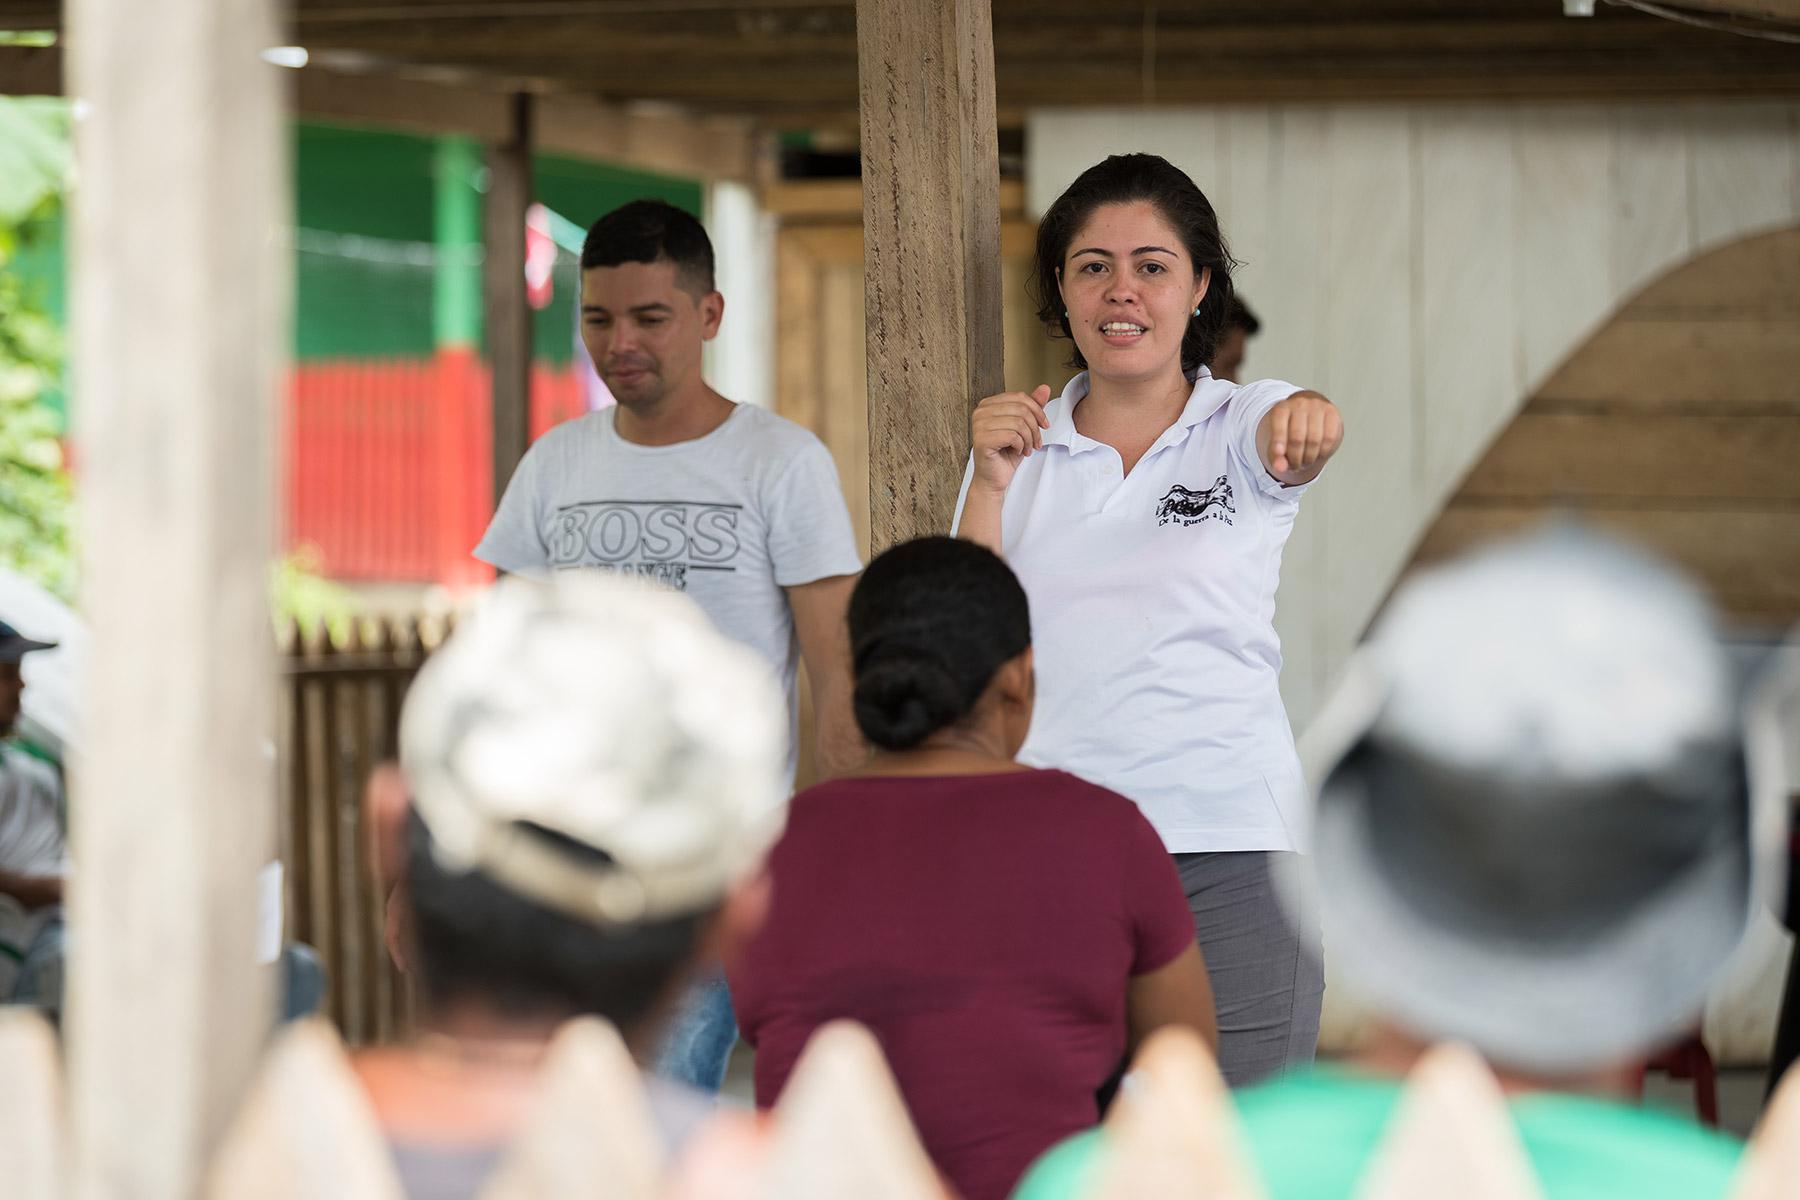 The peacebuilding work of the Evangelical Lutheran Church of Colombia includes supporting ex-combatants to reintegrate into society. Sociologist Ana EloÃ­sa GÃ³mez, leading a workshop in San JosÃ© de LeÃ³, in the northwestern department of Antioquia, in 2018. Photo: LWF/Albin Hillert